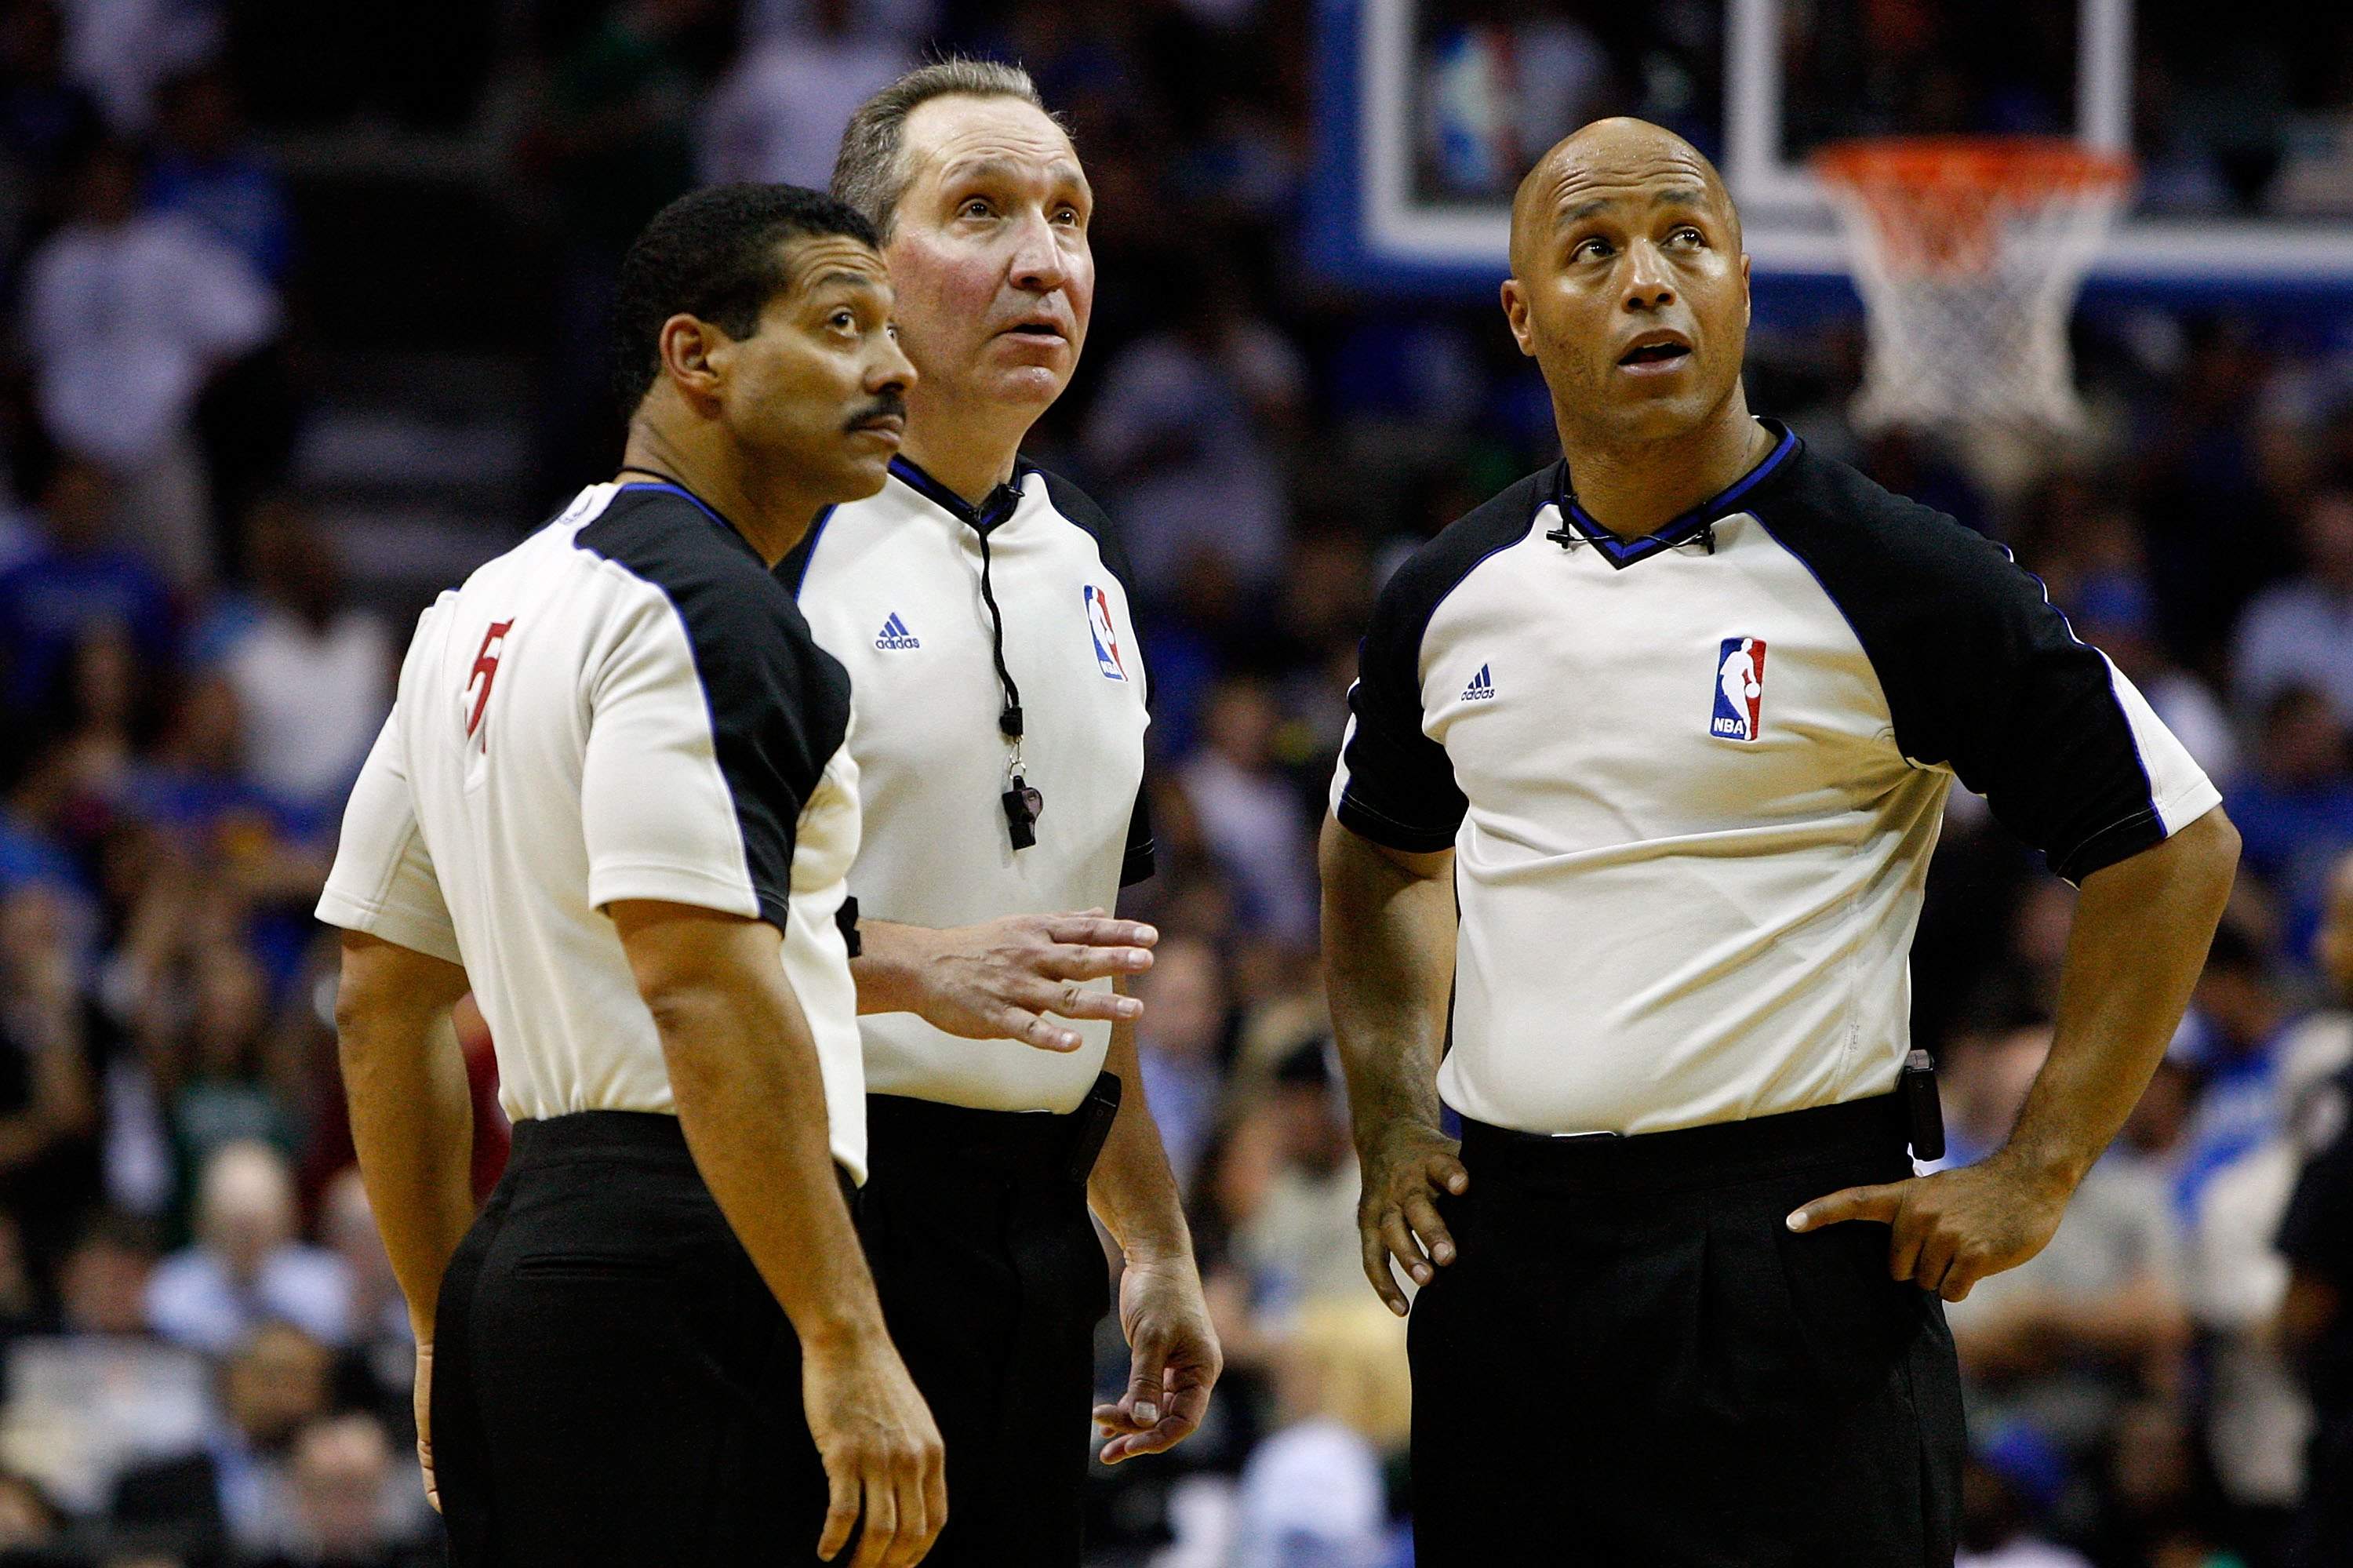 NBA introduces new initiatives to improve officiating - SLAMonline